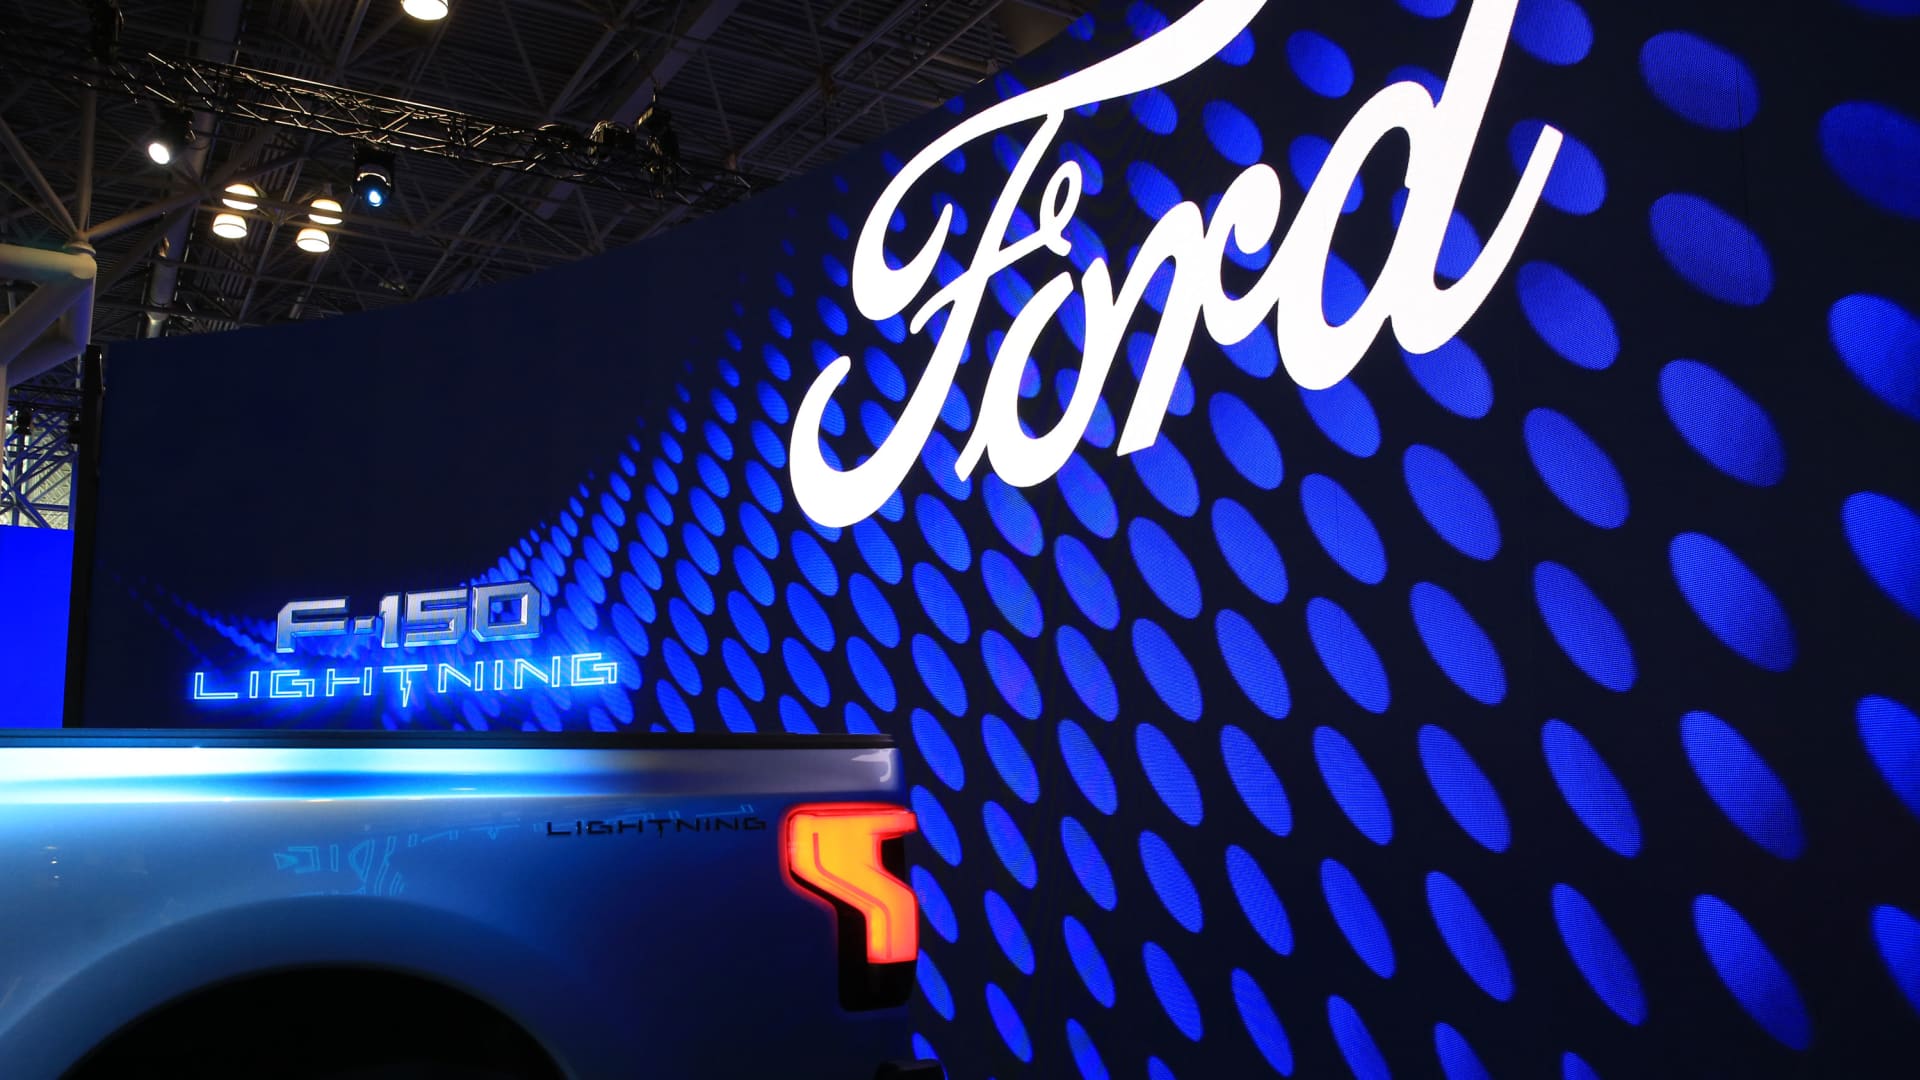 Deutsche Financial institution downgrades Ford, cites ugly fourth quarter and ‘aggressive’ 2023 steering